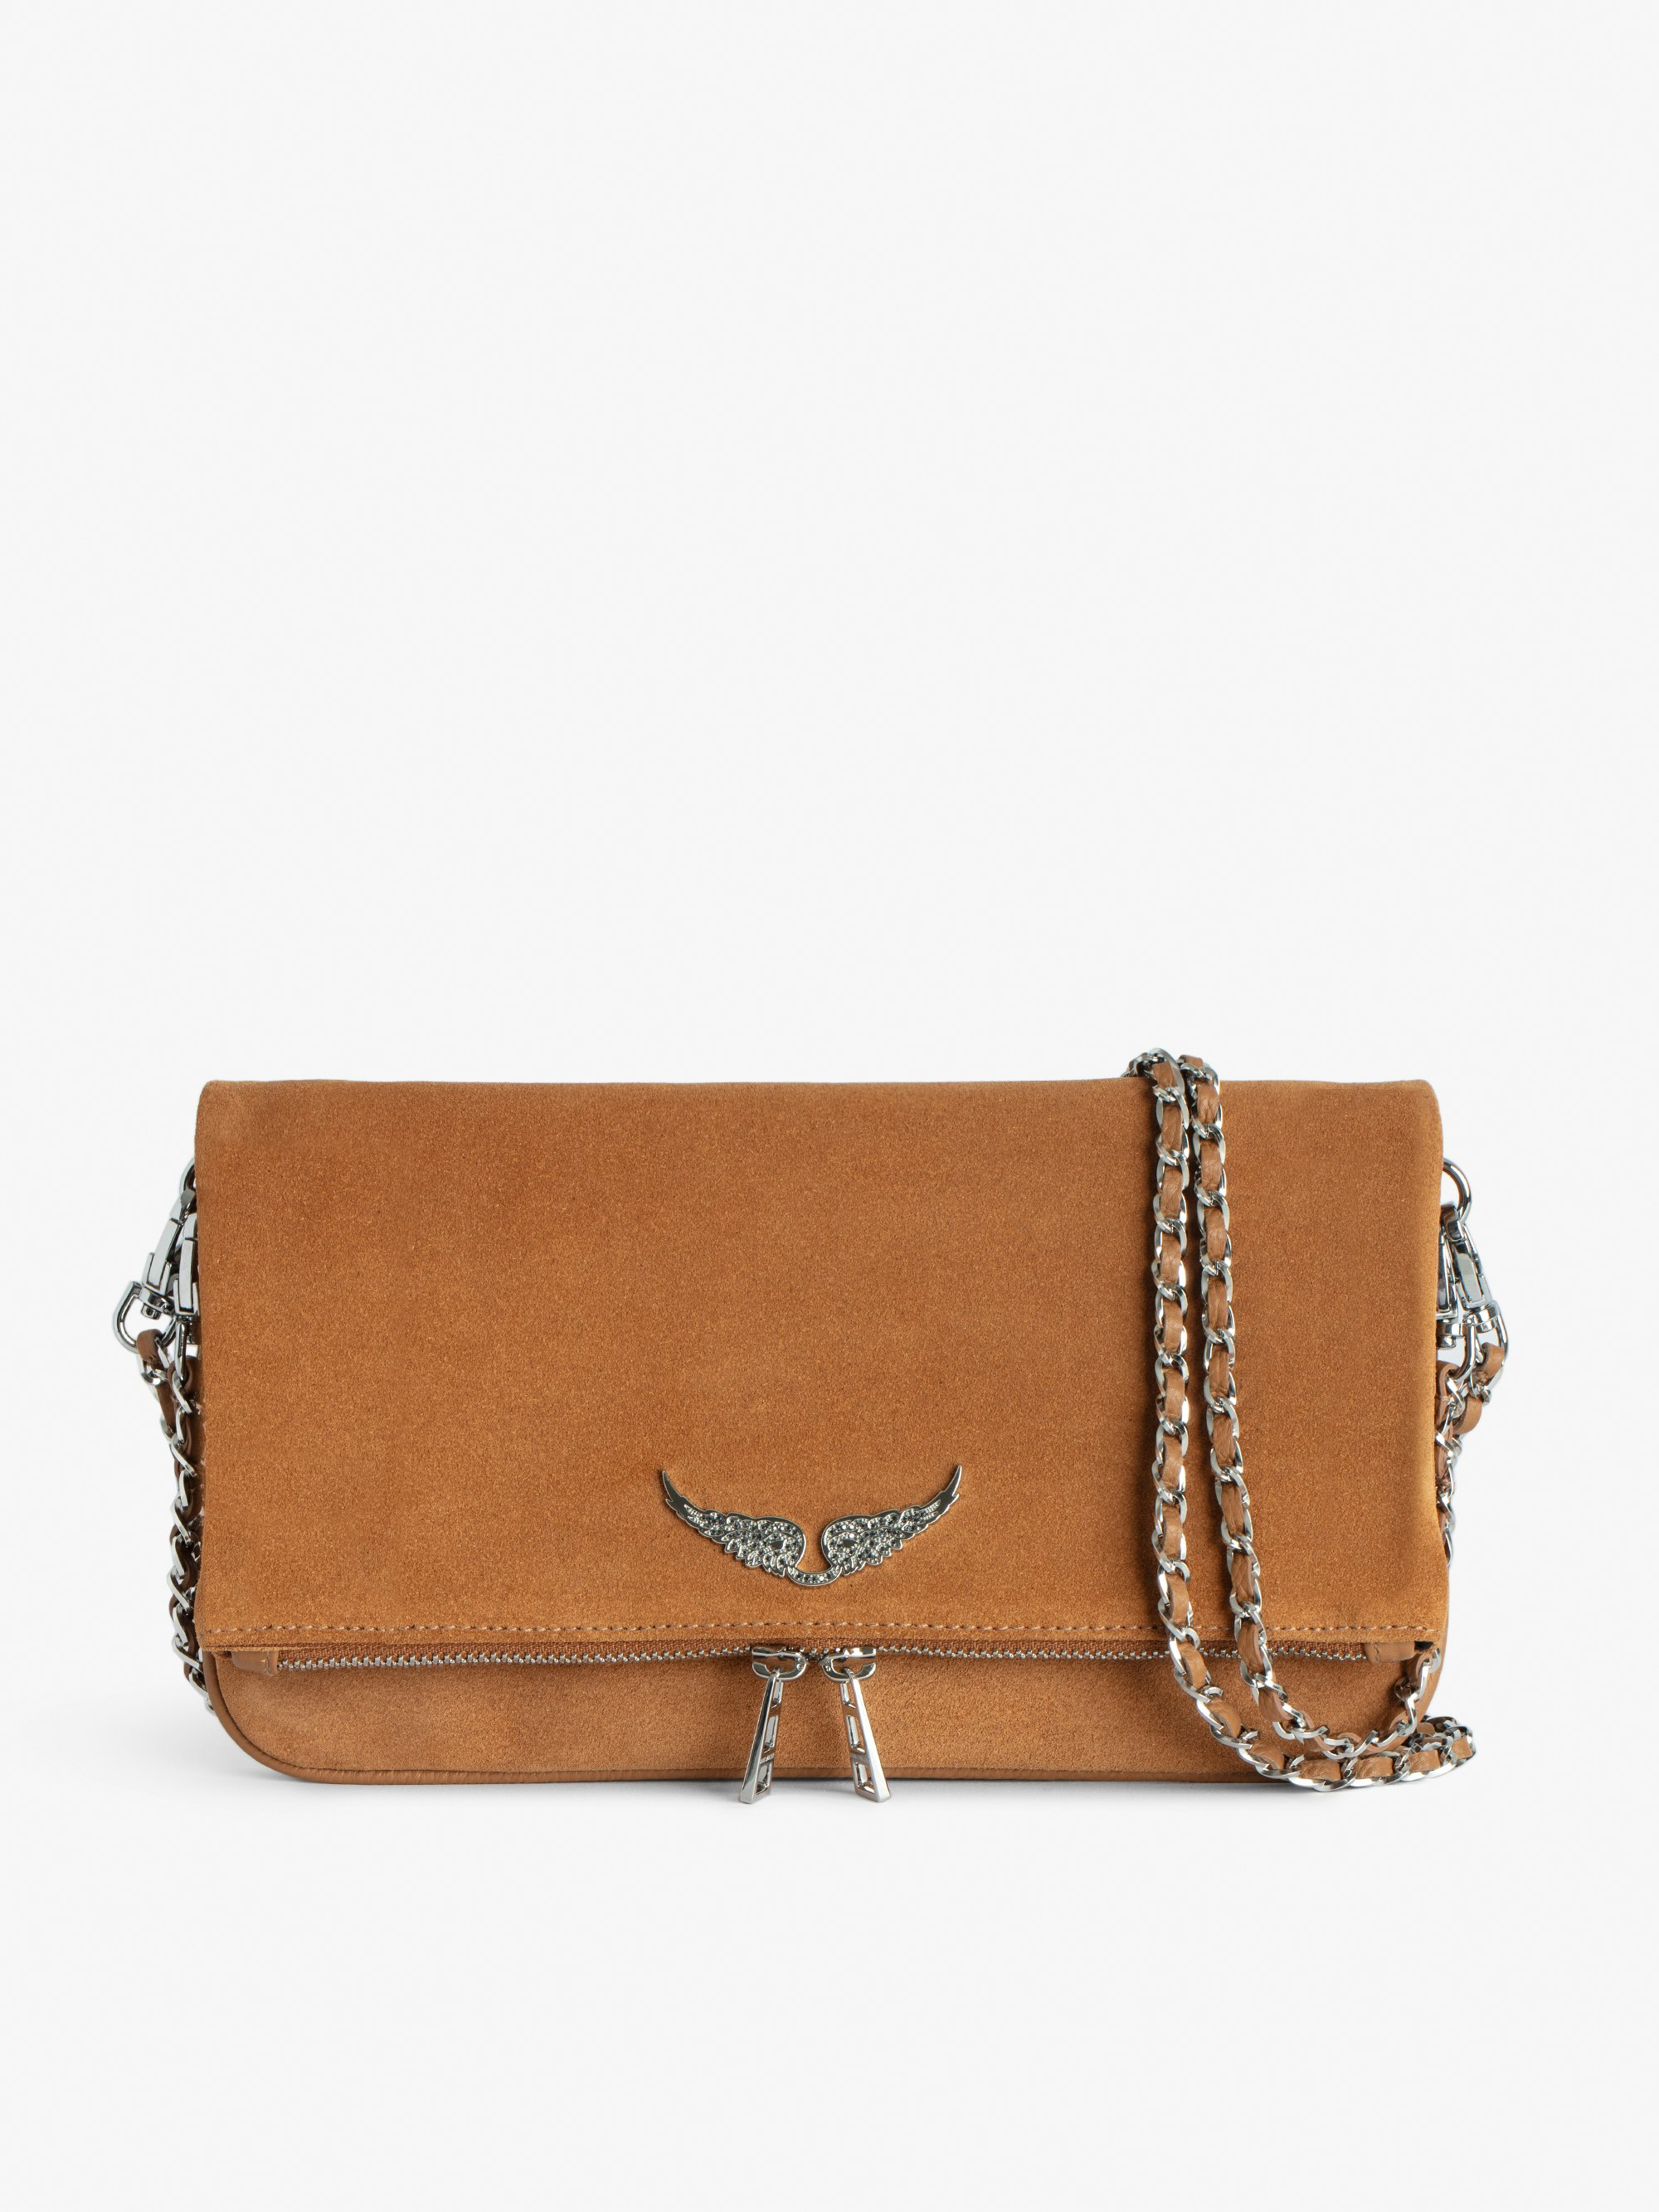 Rock Suede Clutch - Suede clutch with double chain and signature diamante wings.